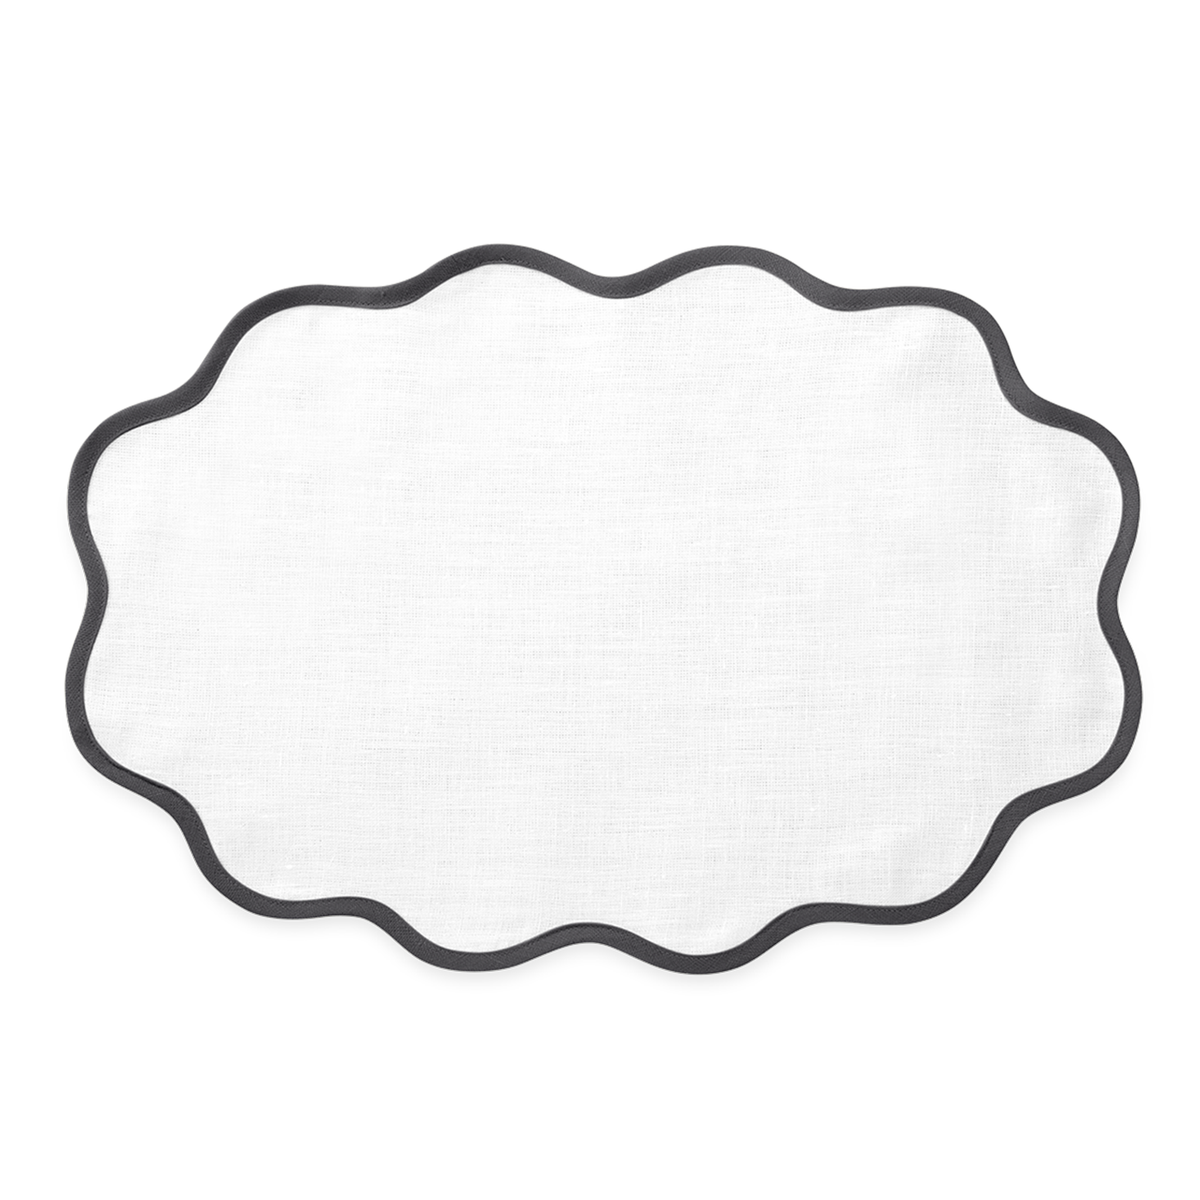 Oval Placemat of Matouk Scallop Edge Table Linens in Color Smoke Grey